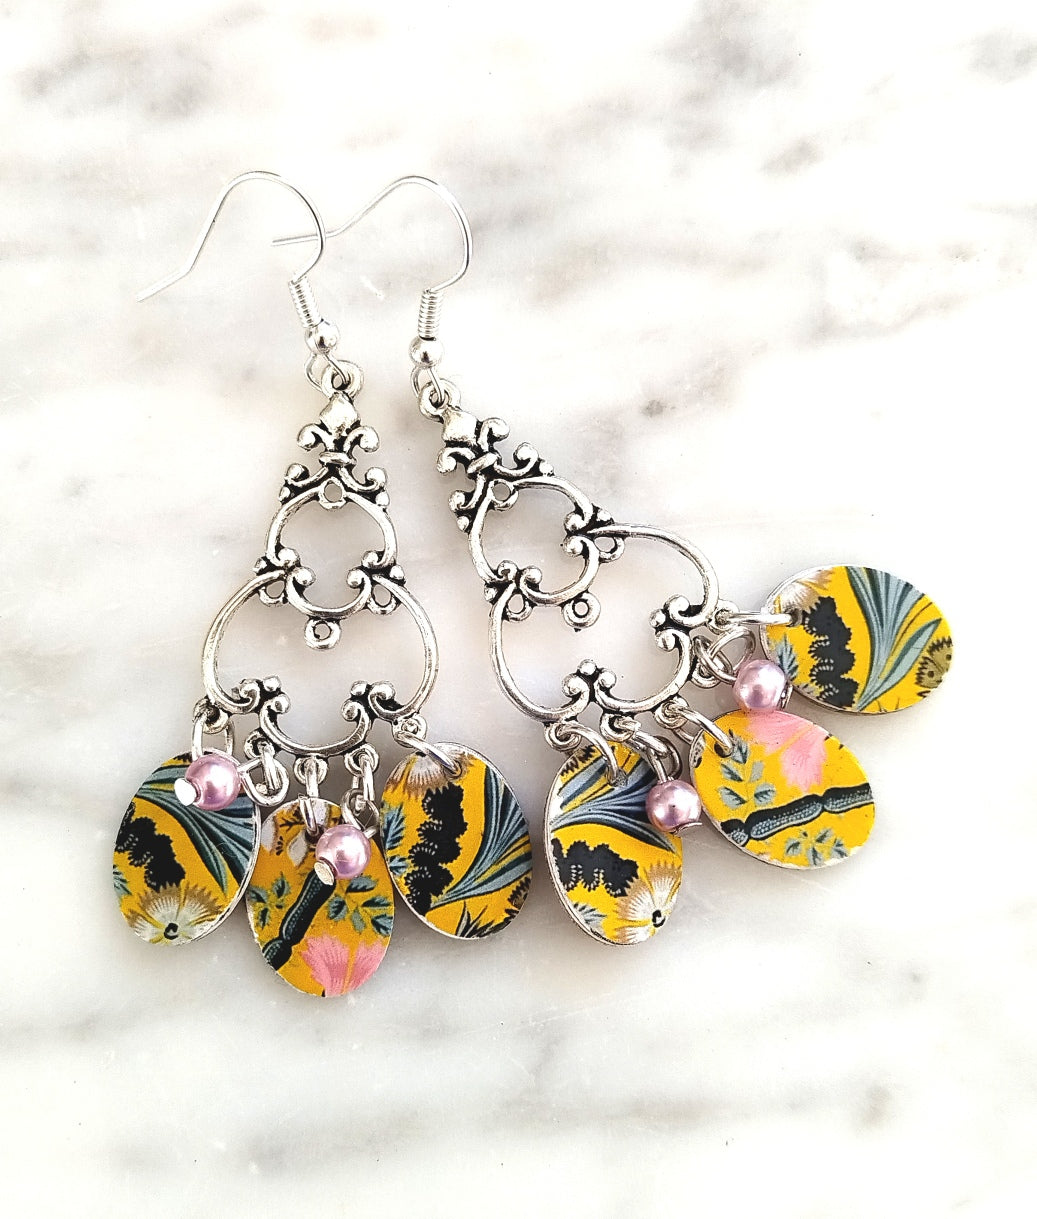 Silver coloured chandelier earrings with yellow dangles